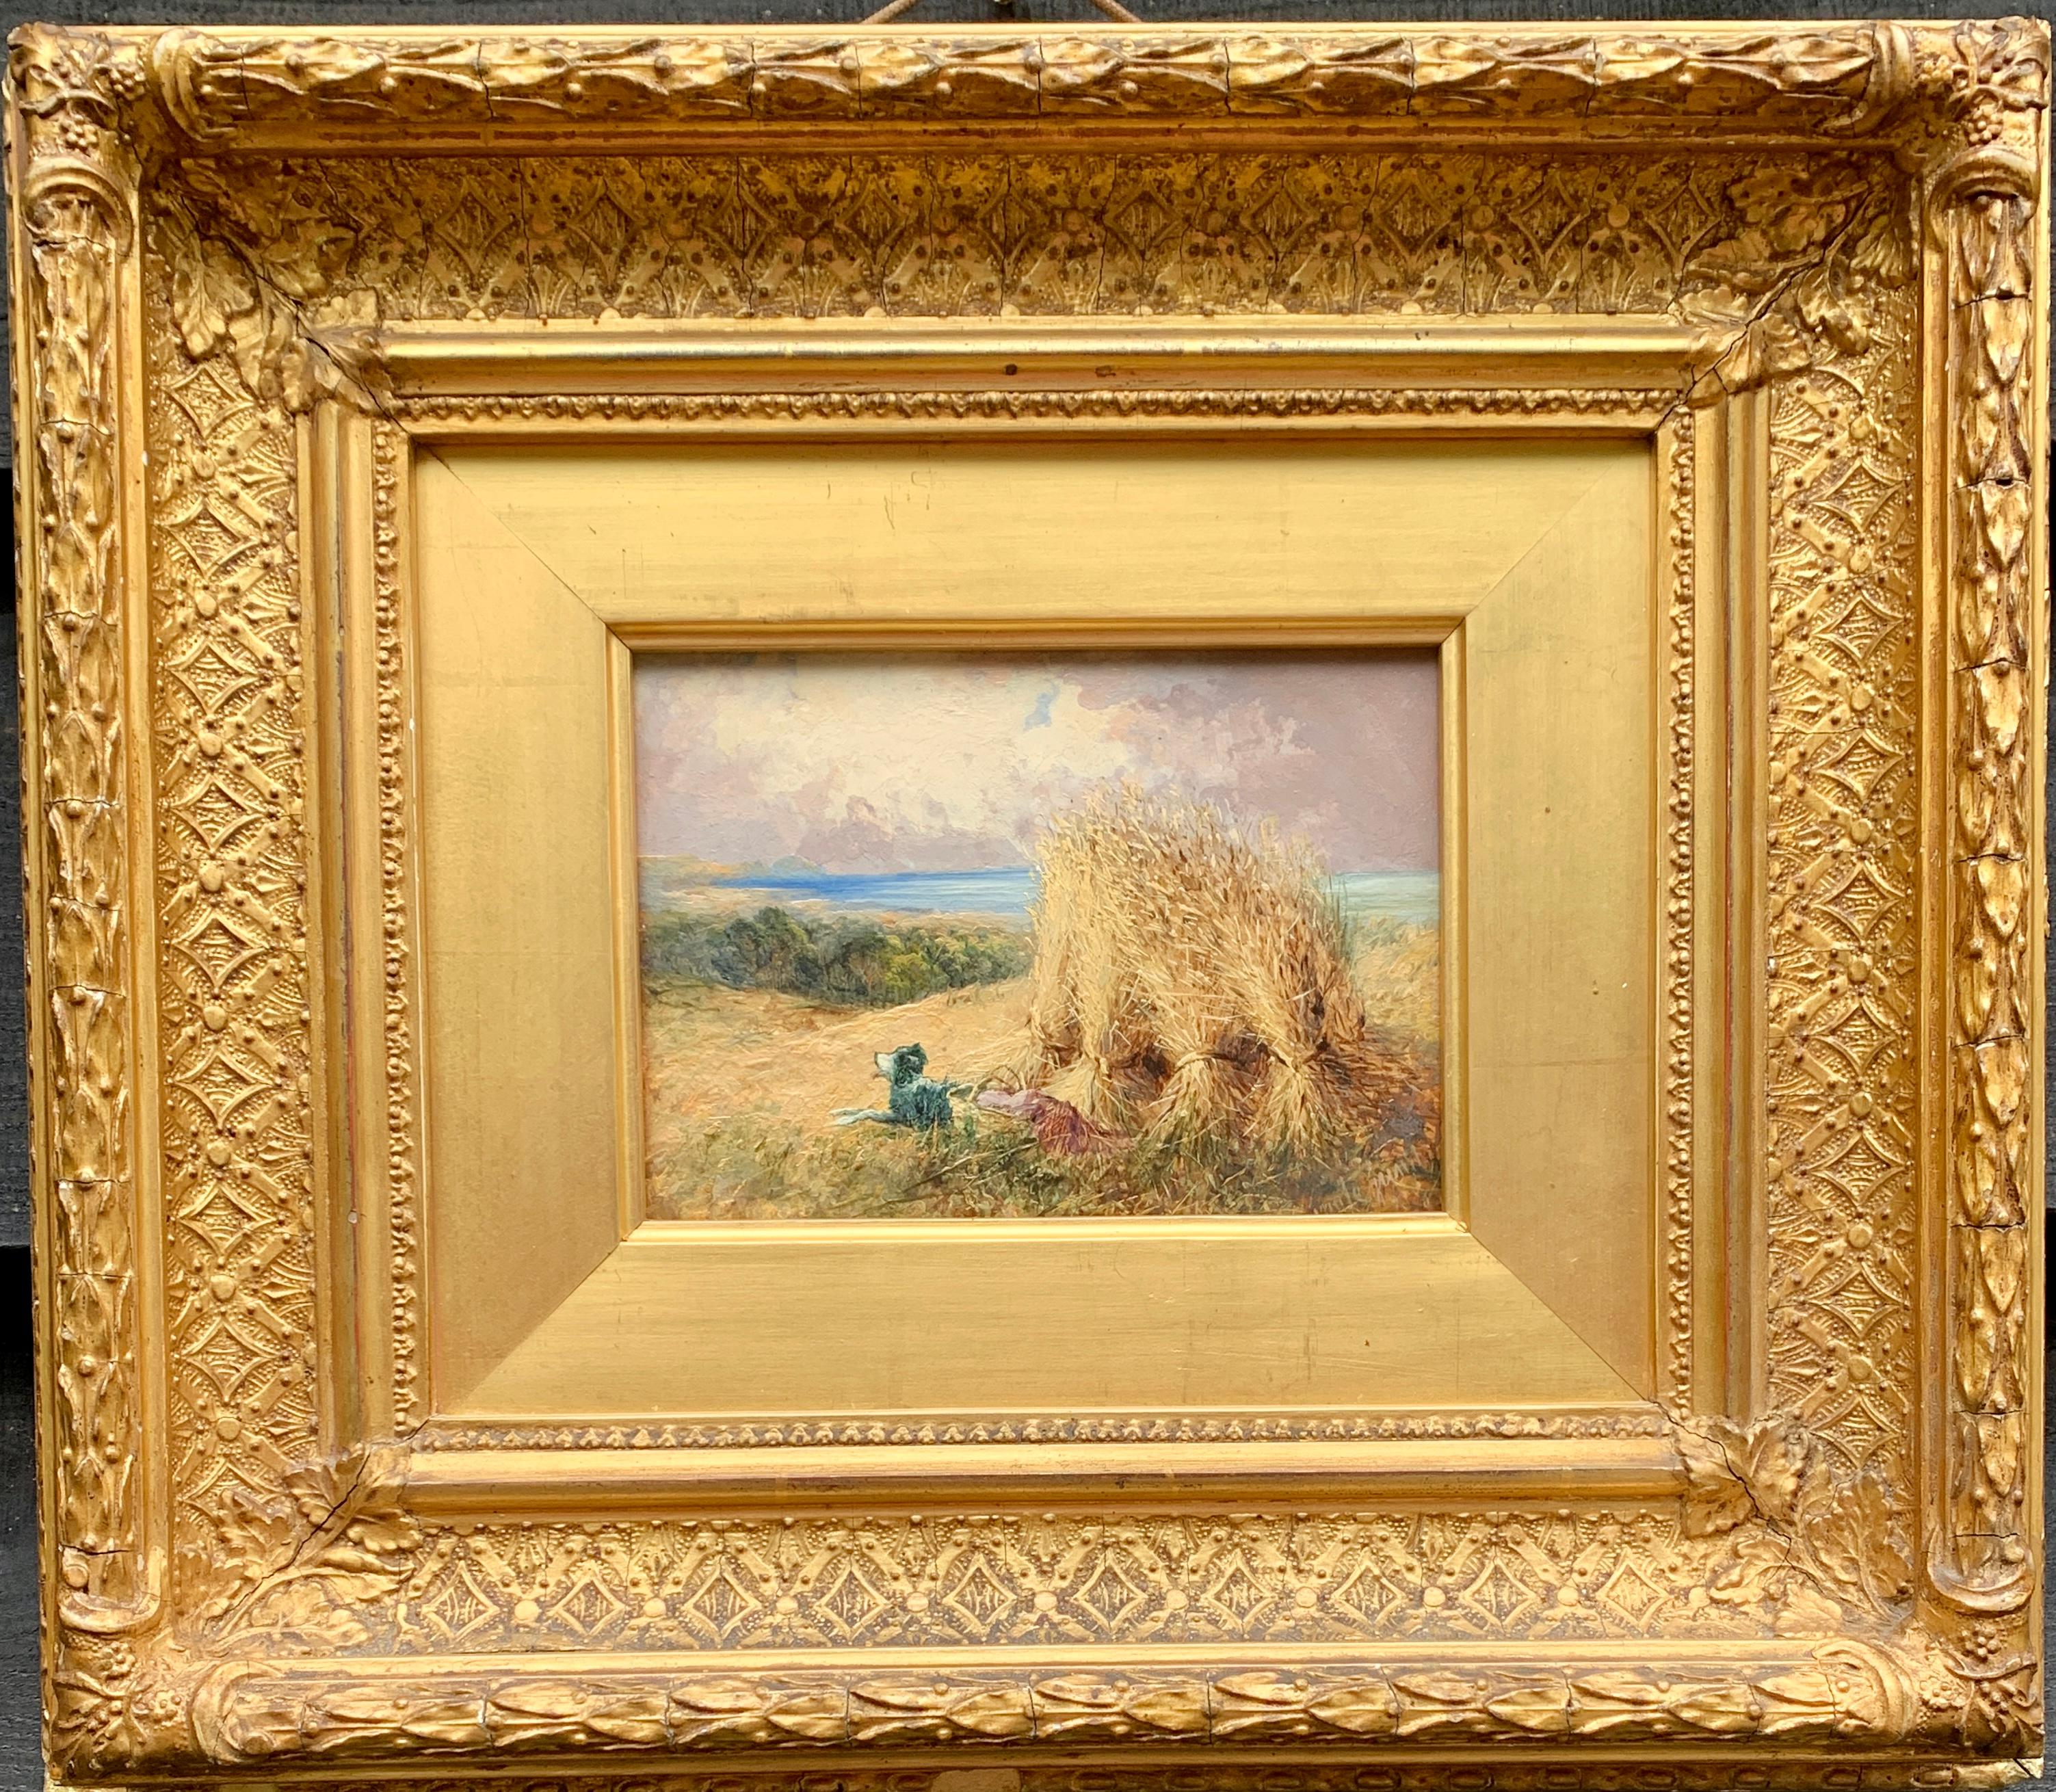 Antique English Harvest landscape with corn stacks, dog and view of the sea